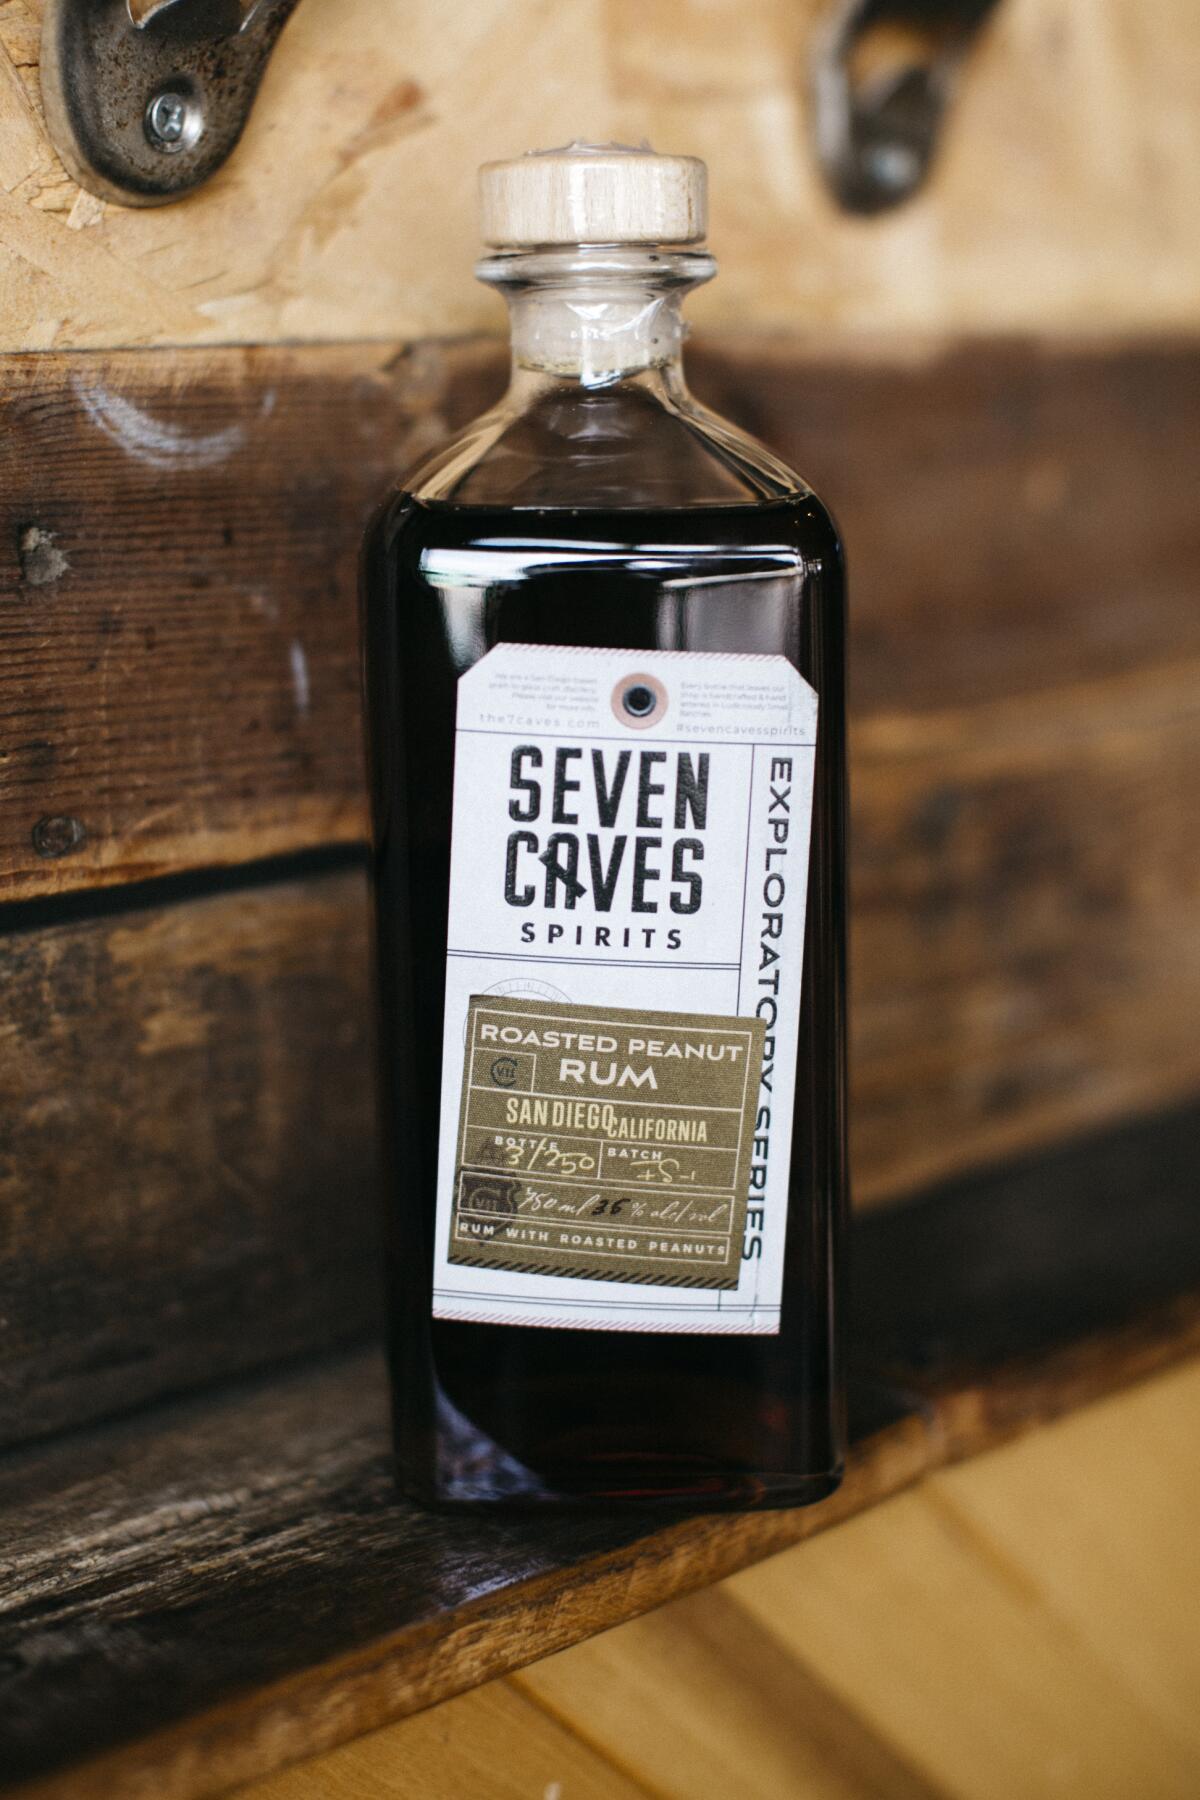 A bottle of roasted peanut rum from Seven Caves Spirits.